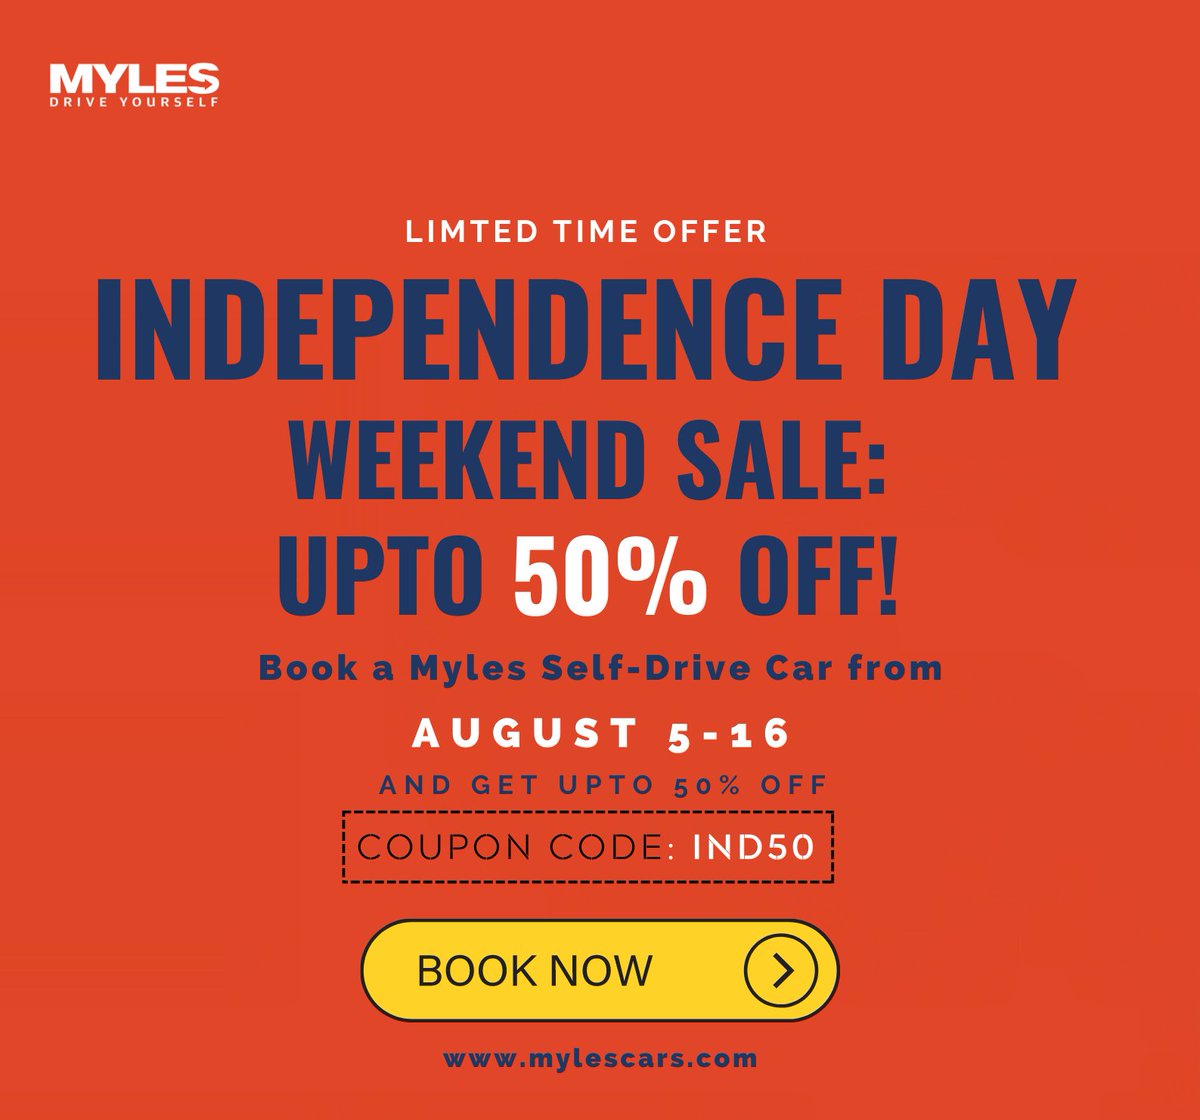 Hurry Up!!!

Grab this exciting offer and plan your Independence Day long weekend getaway with Myles. 

To know more: mylescars.com 
.
.
#Myles #independenceday #independenceday2022 #IndependenceDayOffer #longweekend #selfdrive #selfdrivecar #vacation #mylescars